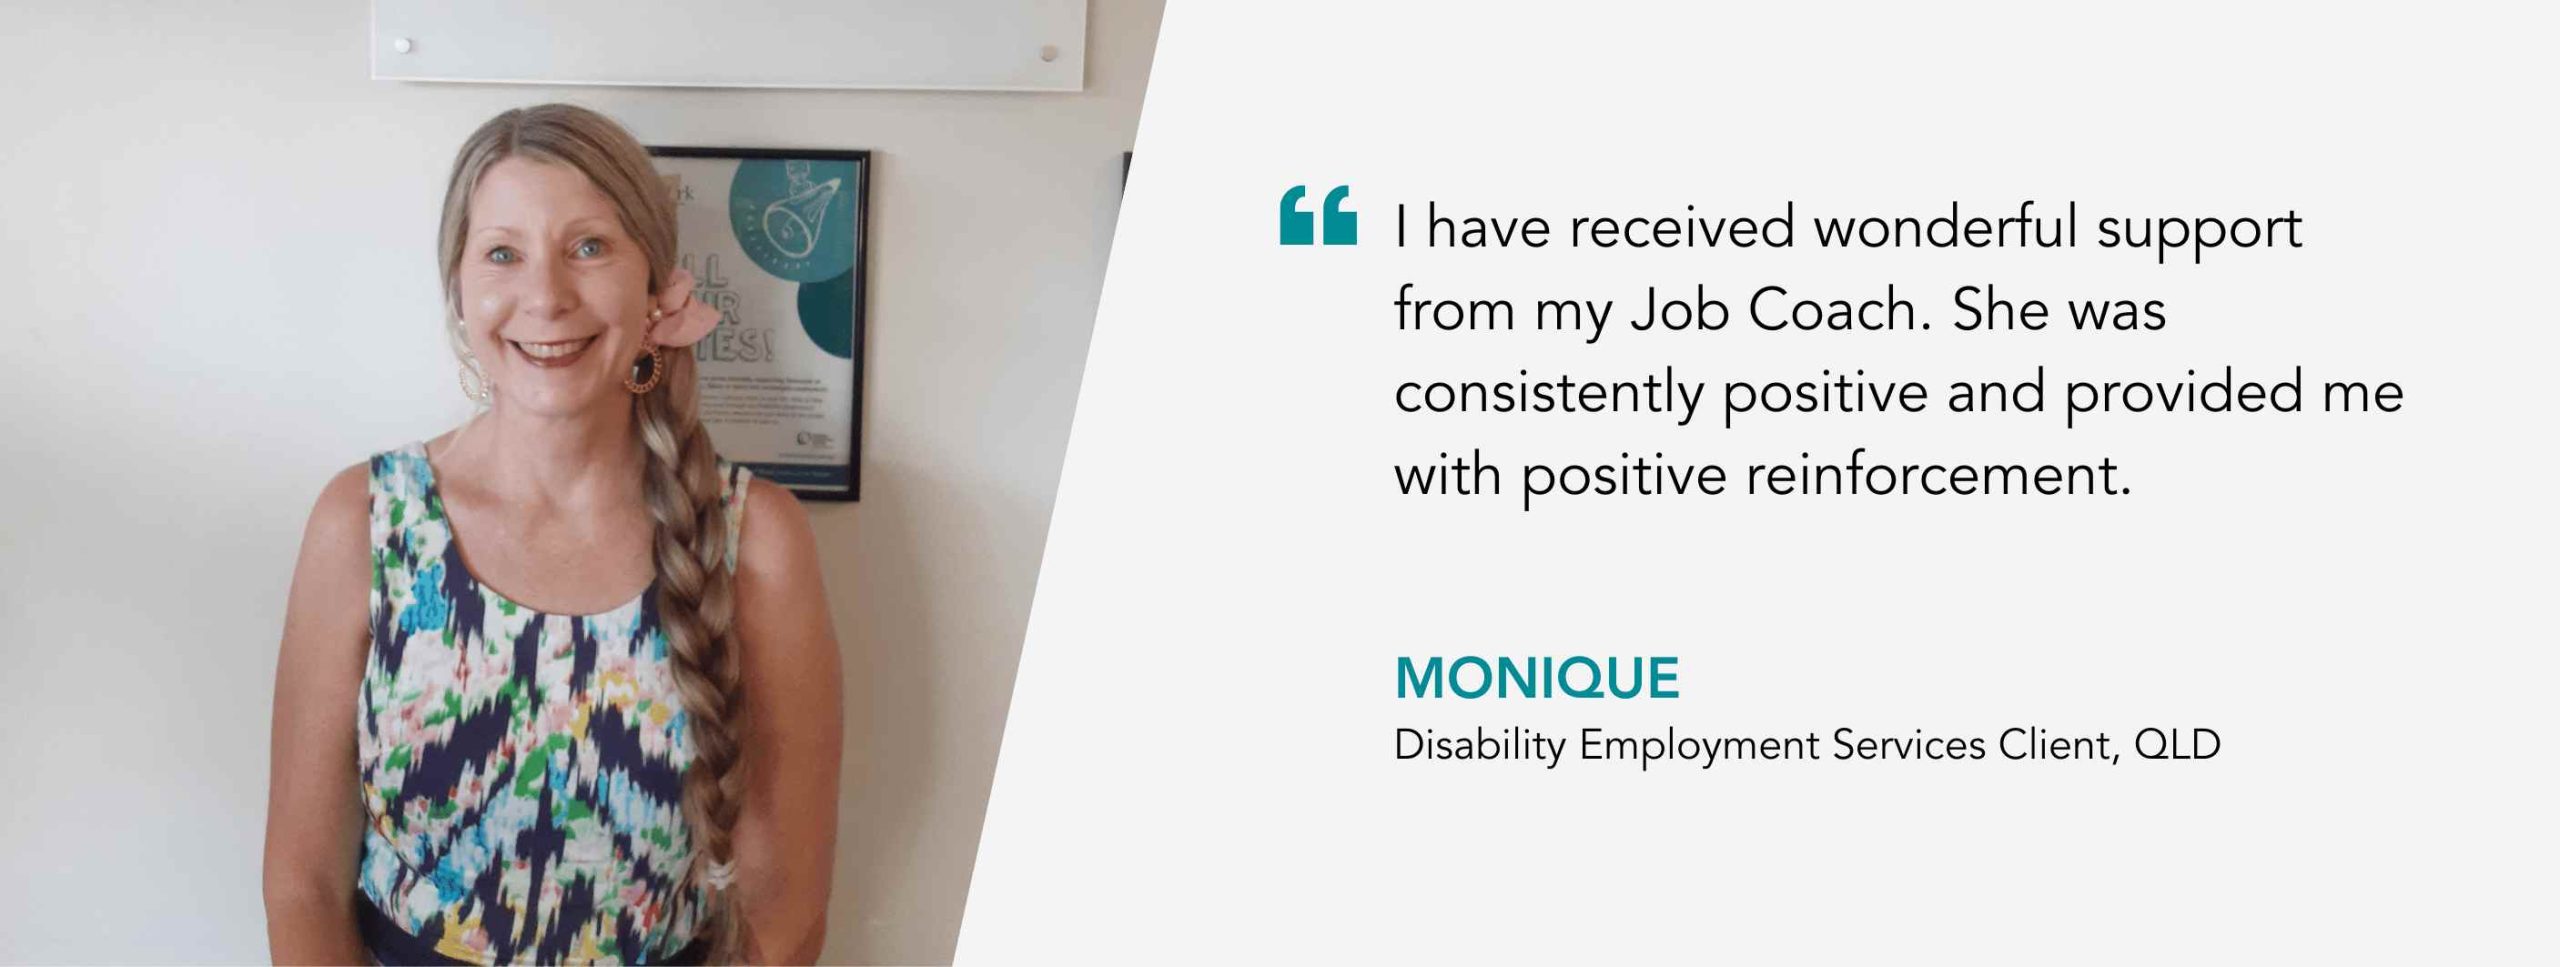 I have received wonderful support from my Job Coach. She was consistently positive and provided me with positive reinforcement. Monique, Disability Employment Services Client